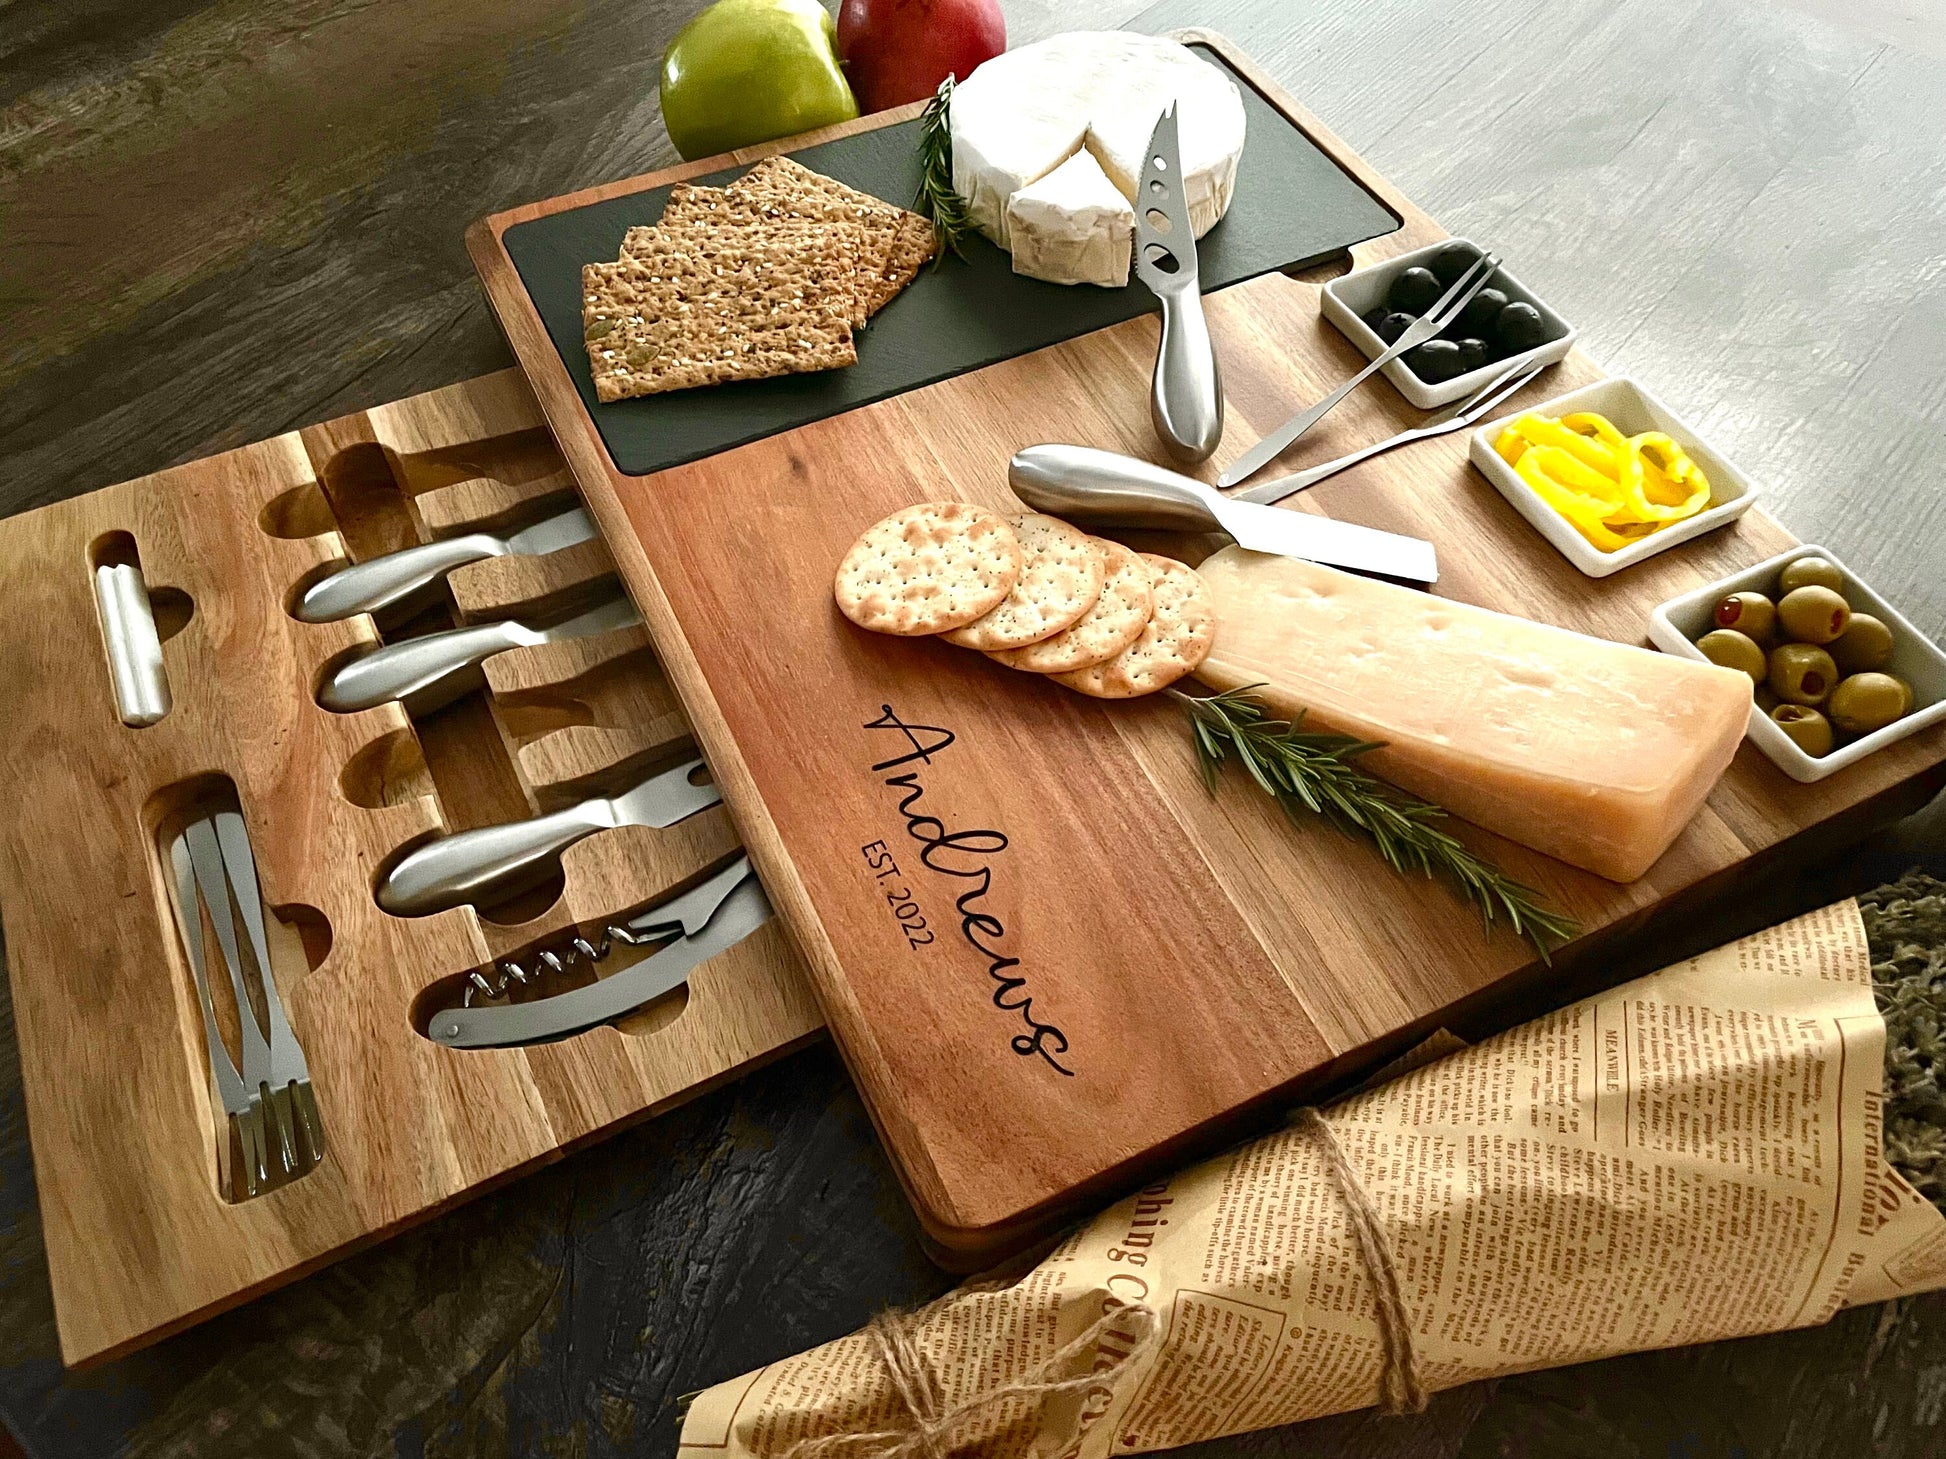 Personalized Custom Created Knife and Cutting Board Set